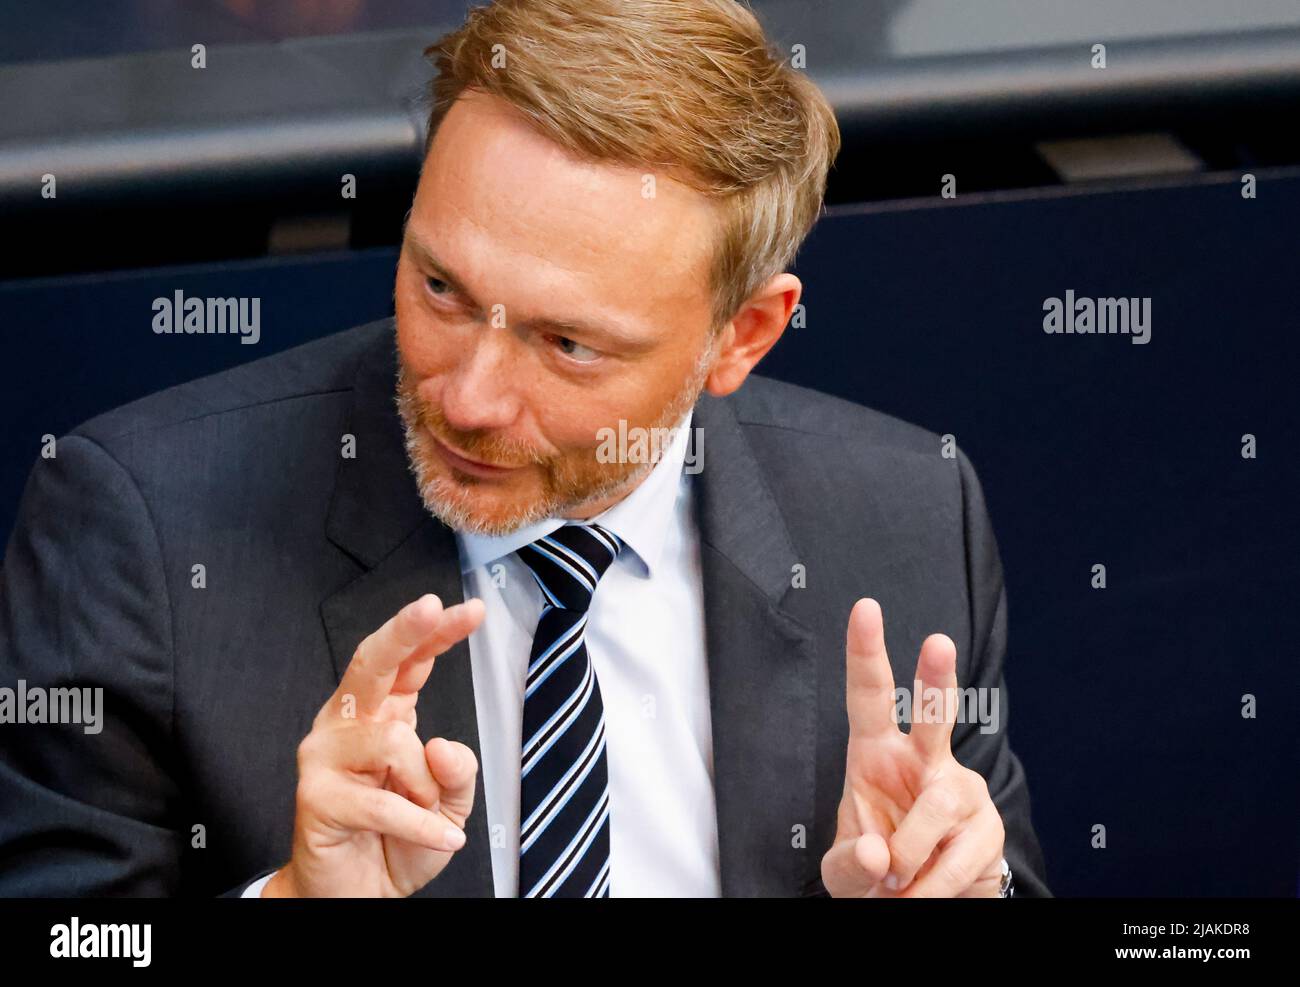 German Finance Minister Christian Lindner attends a session of German lower house of parliament, Bundestag, in Berlin, Germany May 31, 2022. REUTERS/Hannibal Hanschke Stock Photo